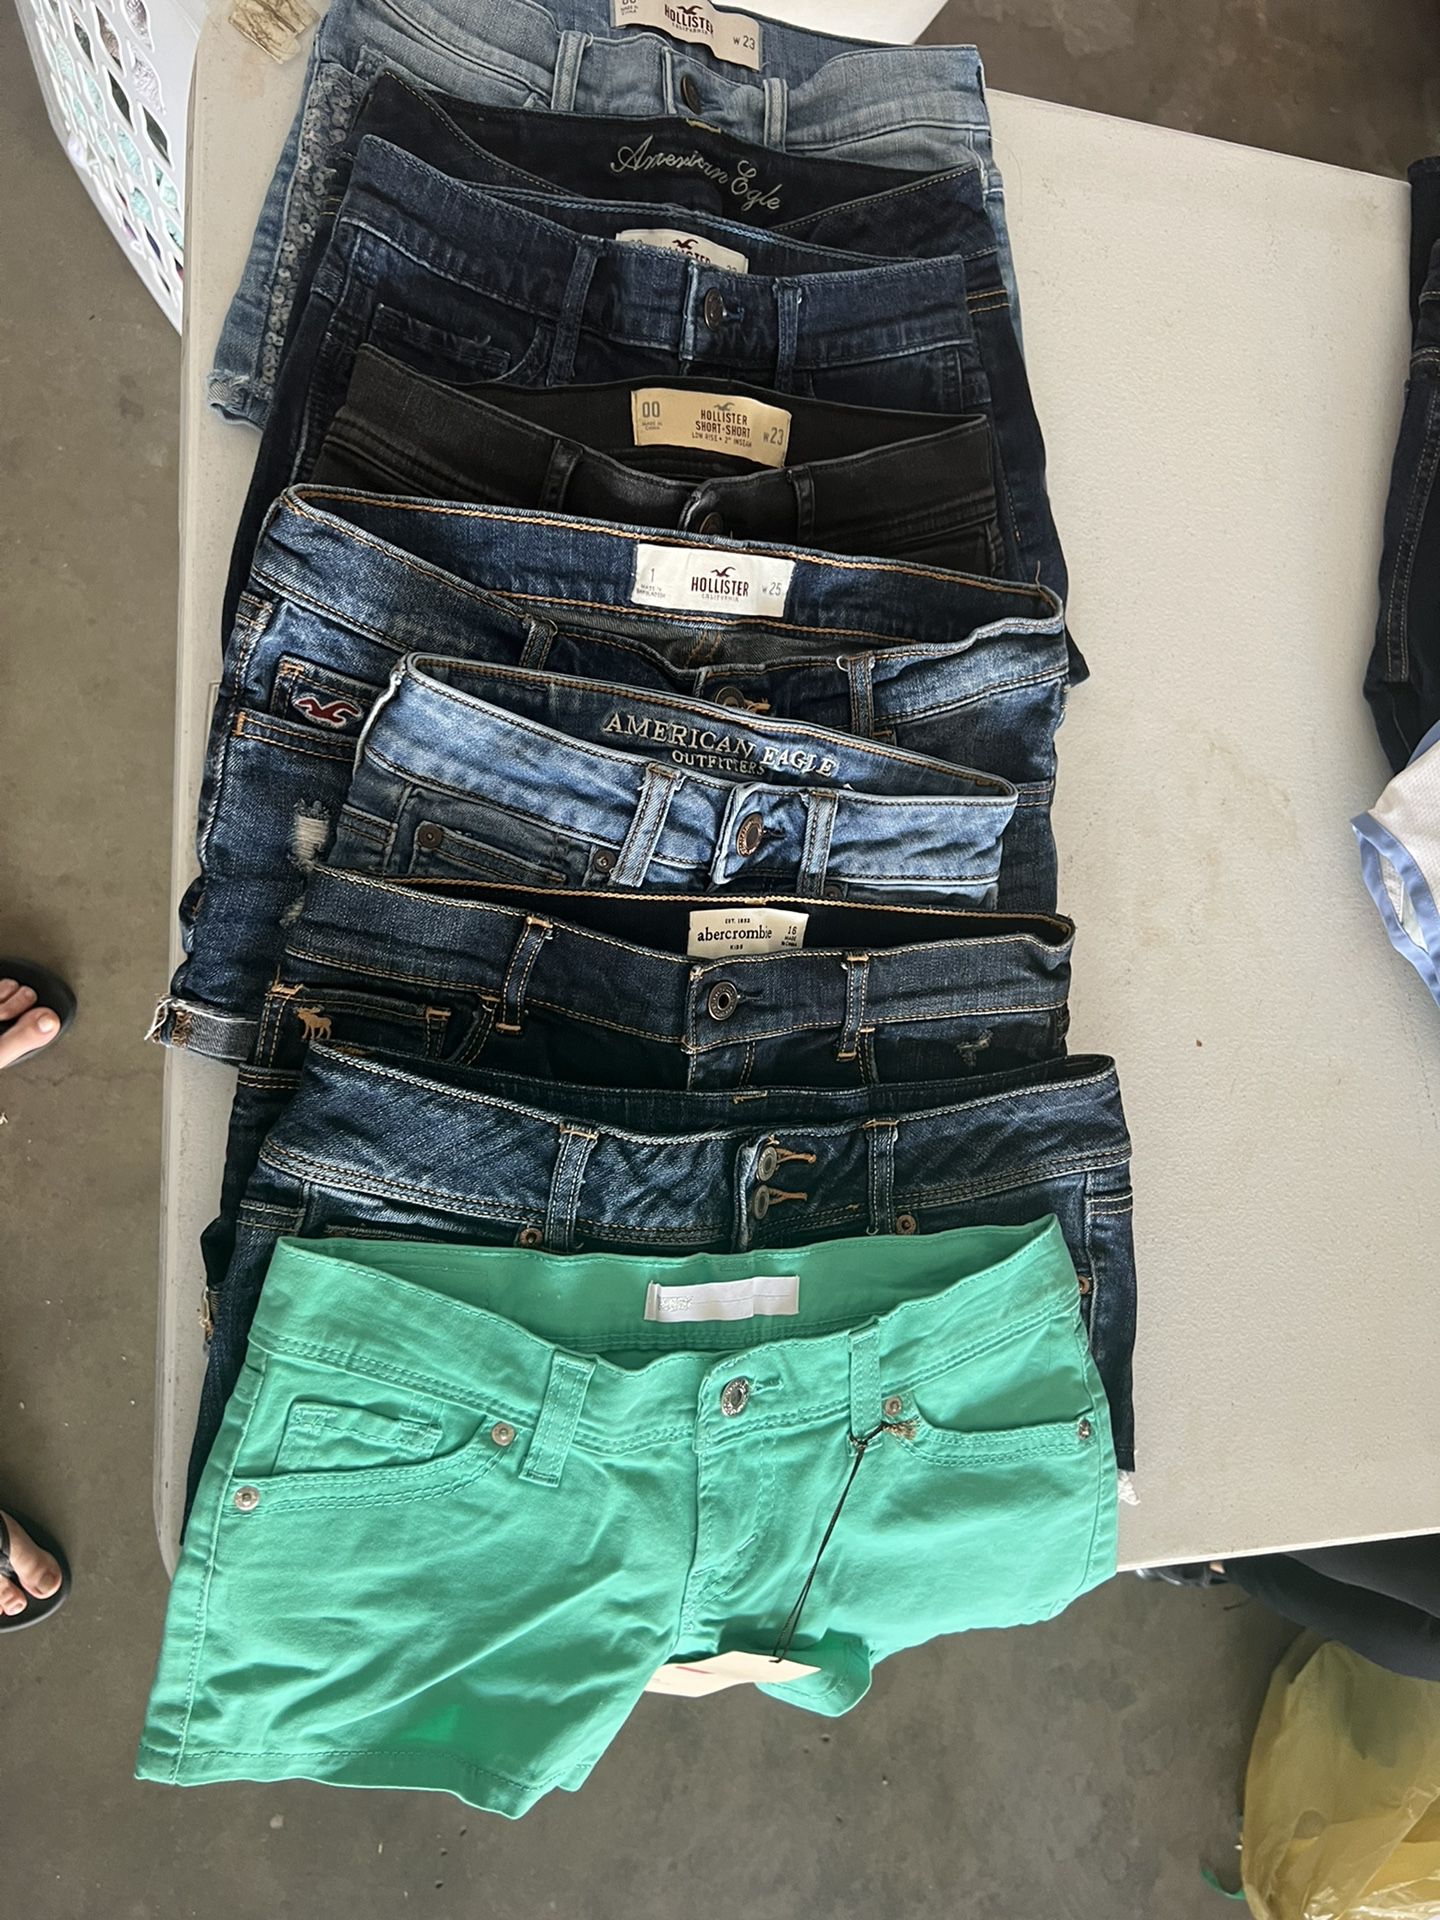 Girl Shorts Size 00,1, 4  And 16… $5 Each